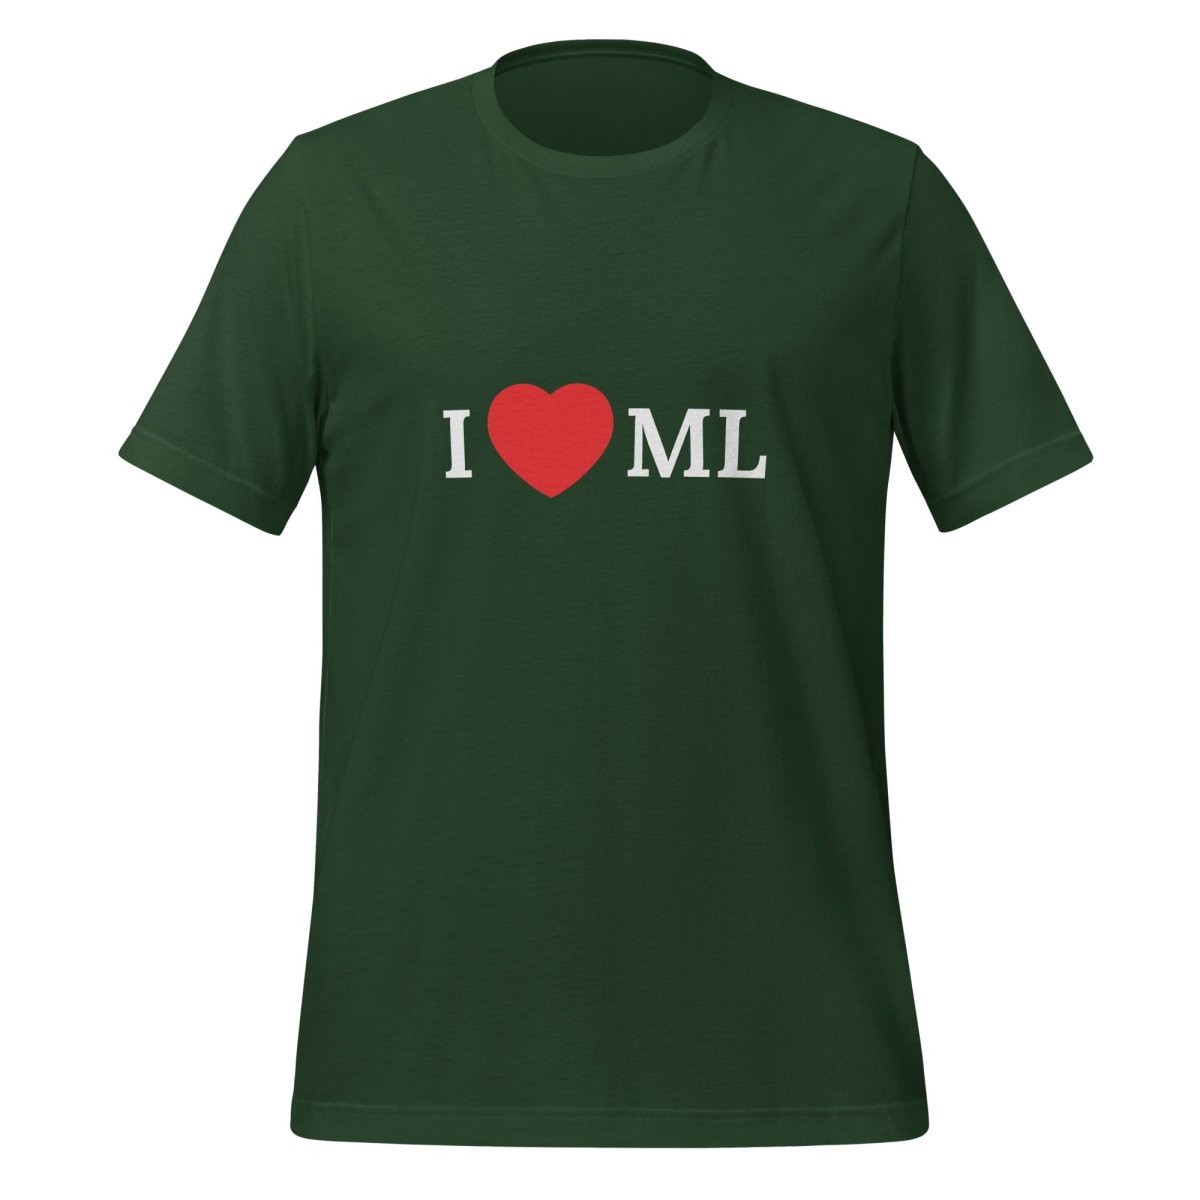 I Love ML (Machine Learning) T - Shirt (unisex) - Forest - AI Store